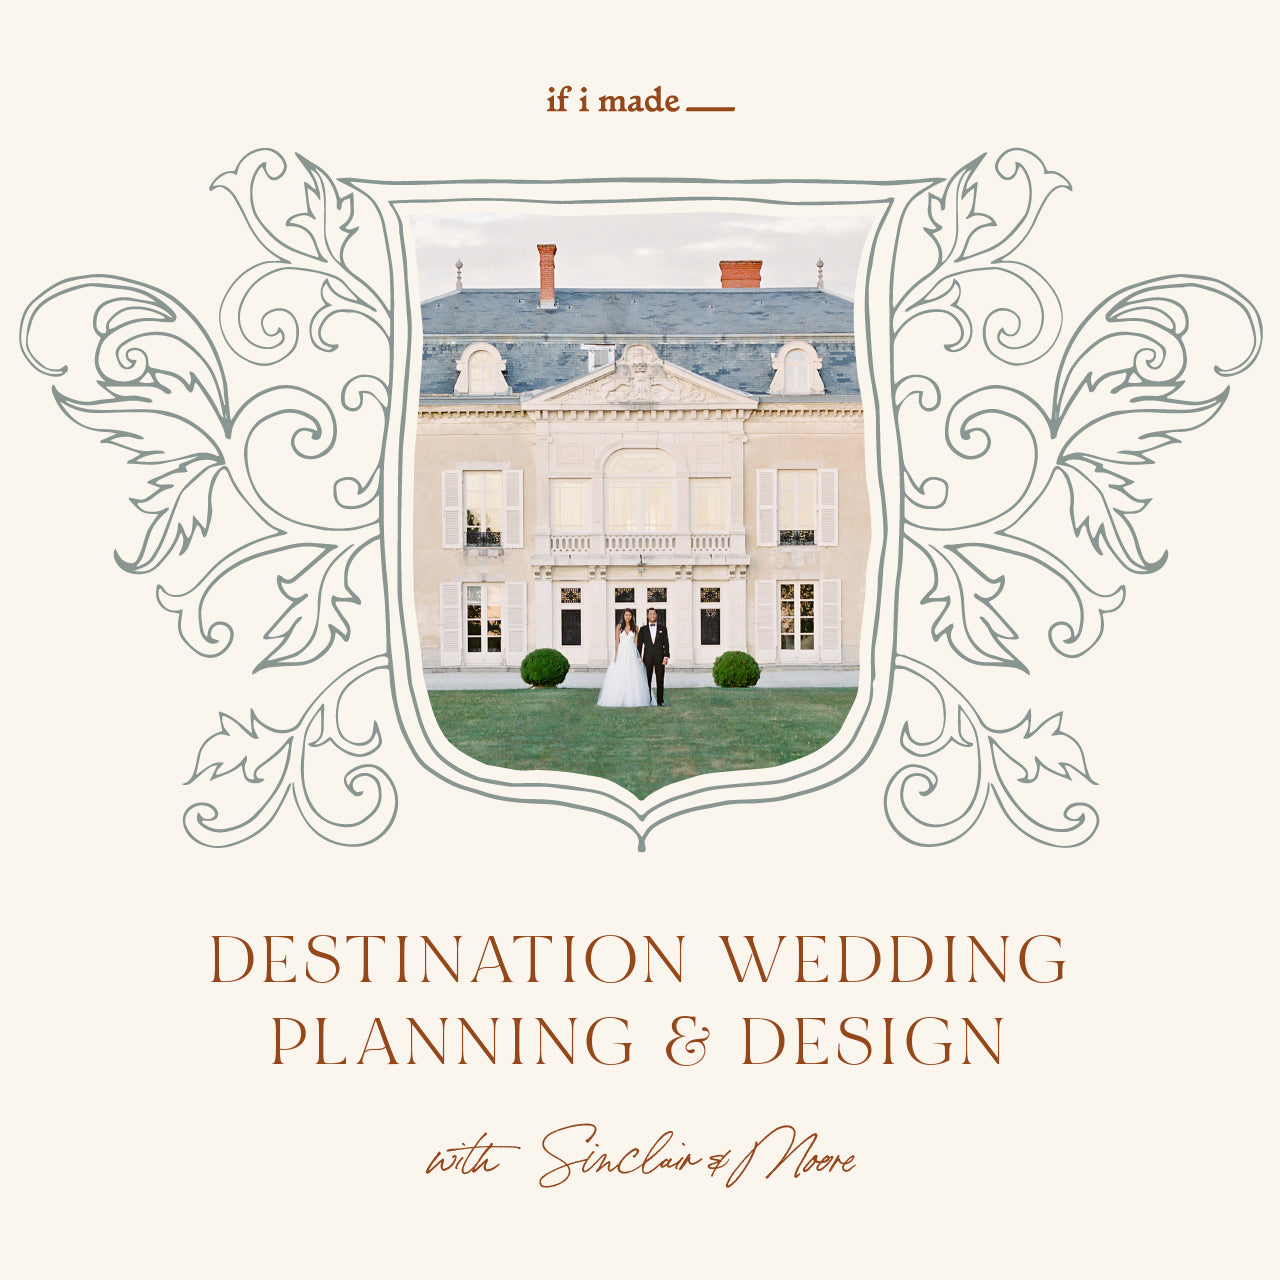 Destination Wedding Planning & Design with Sinclair & Moore (SPP1021) - 16 payments of $99